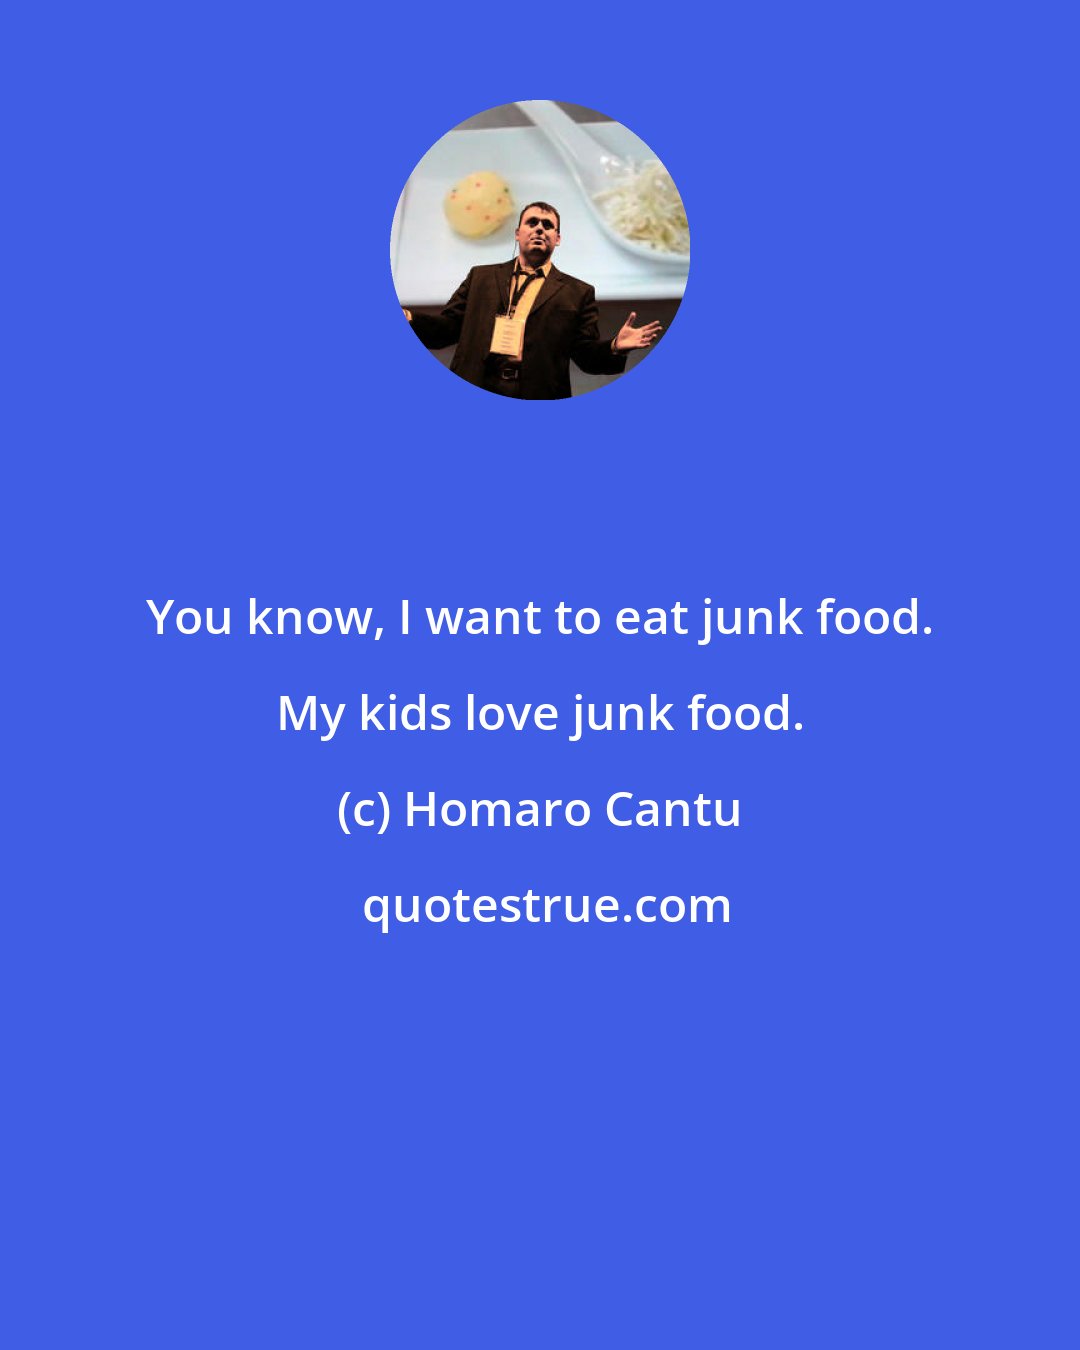 Homaro Cantu: You know, I want to eat junk food. My kids love junk food.